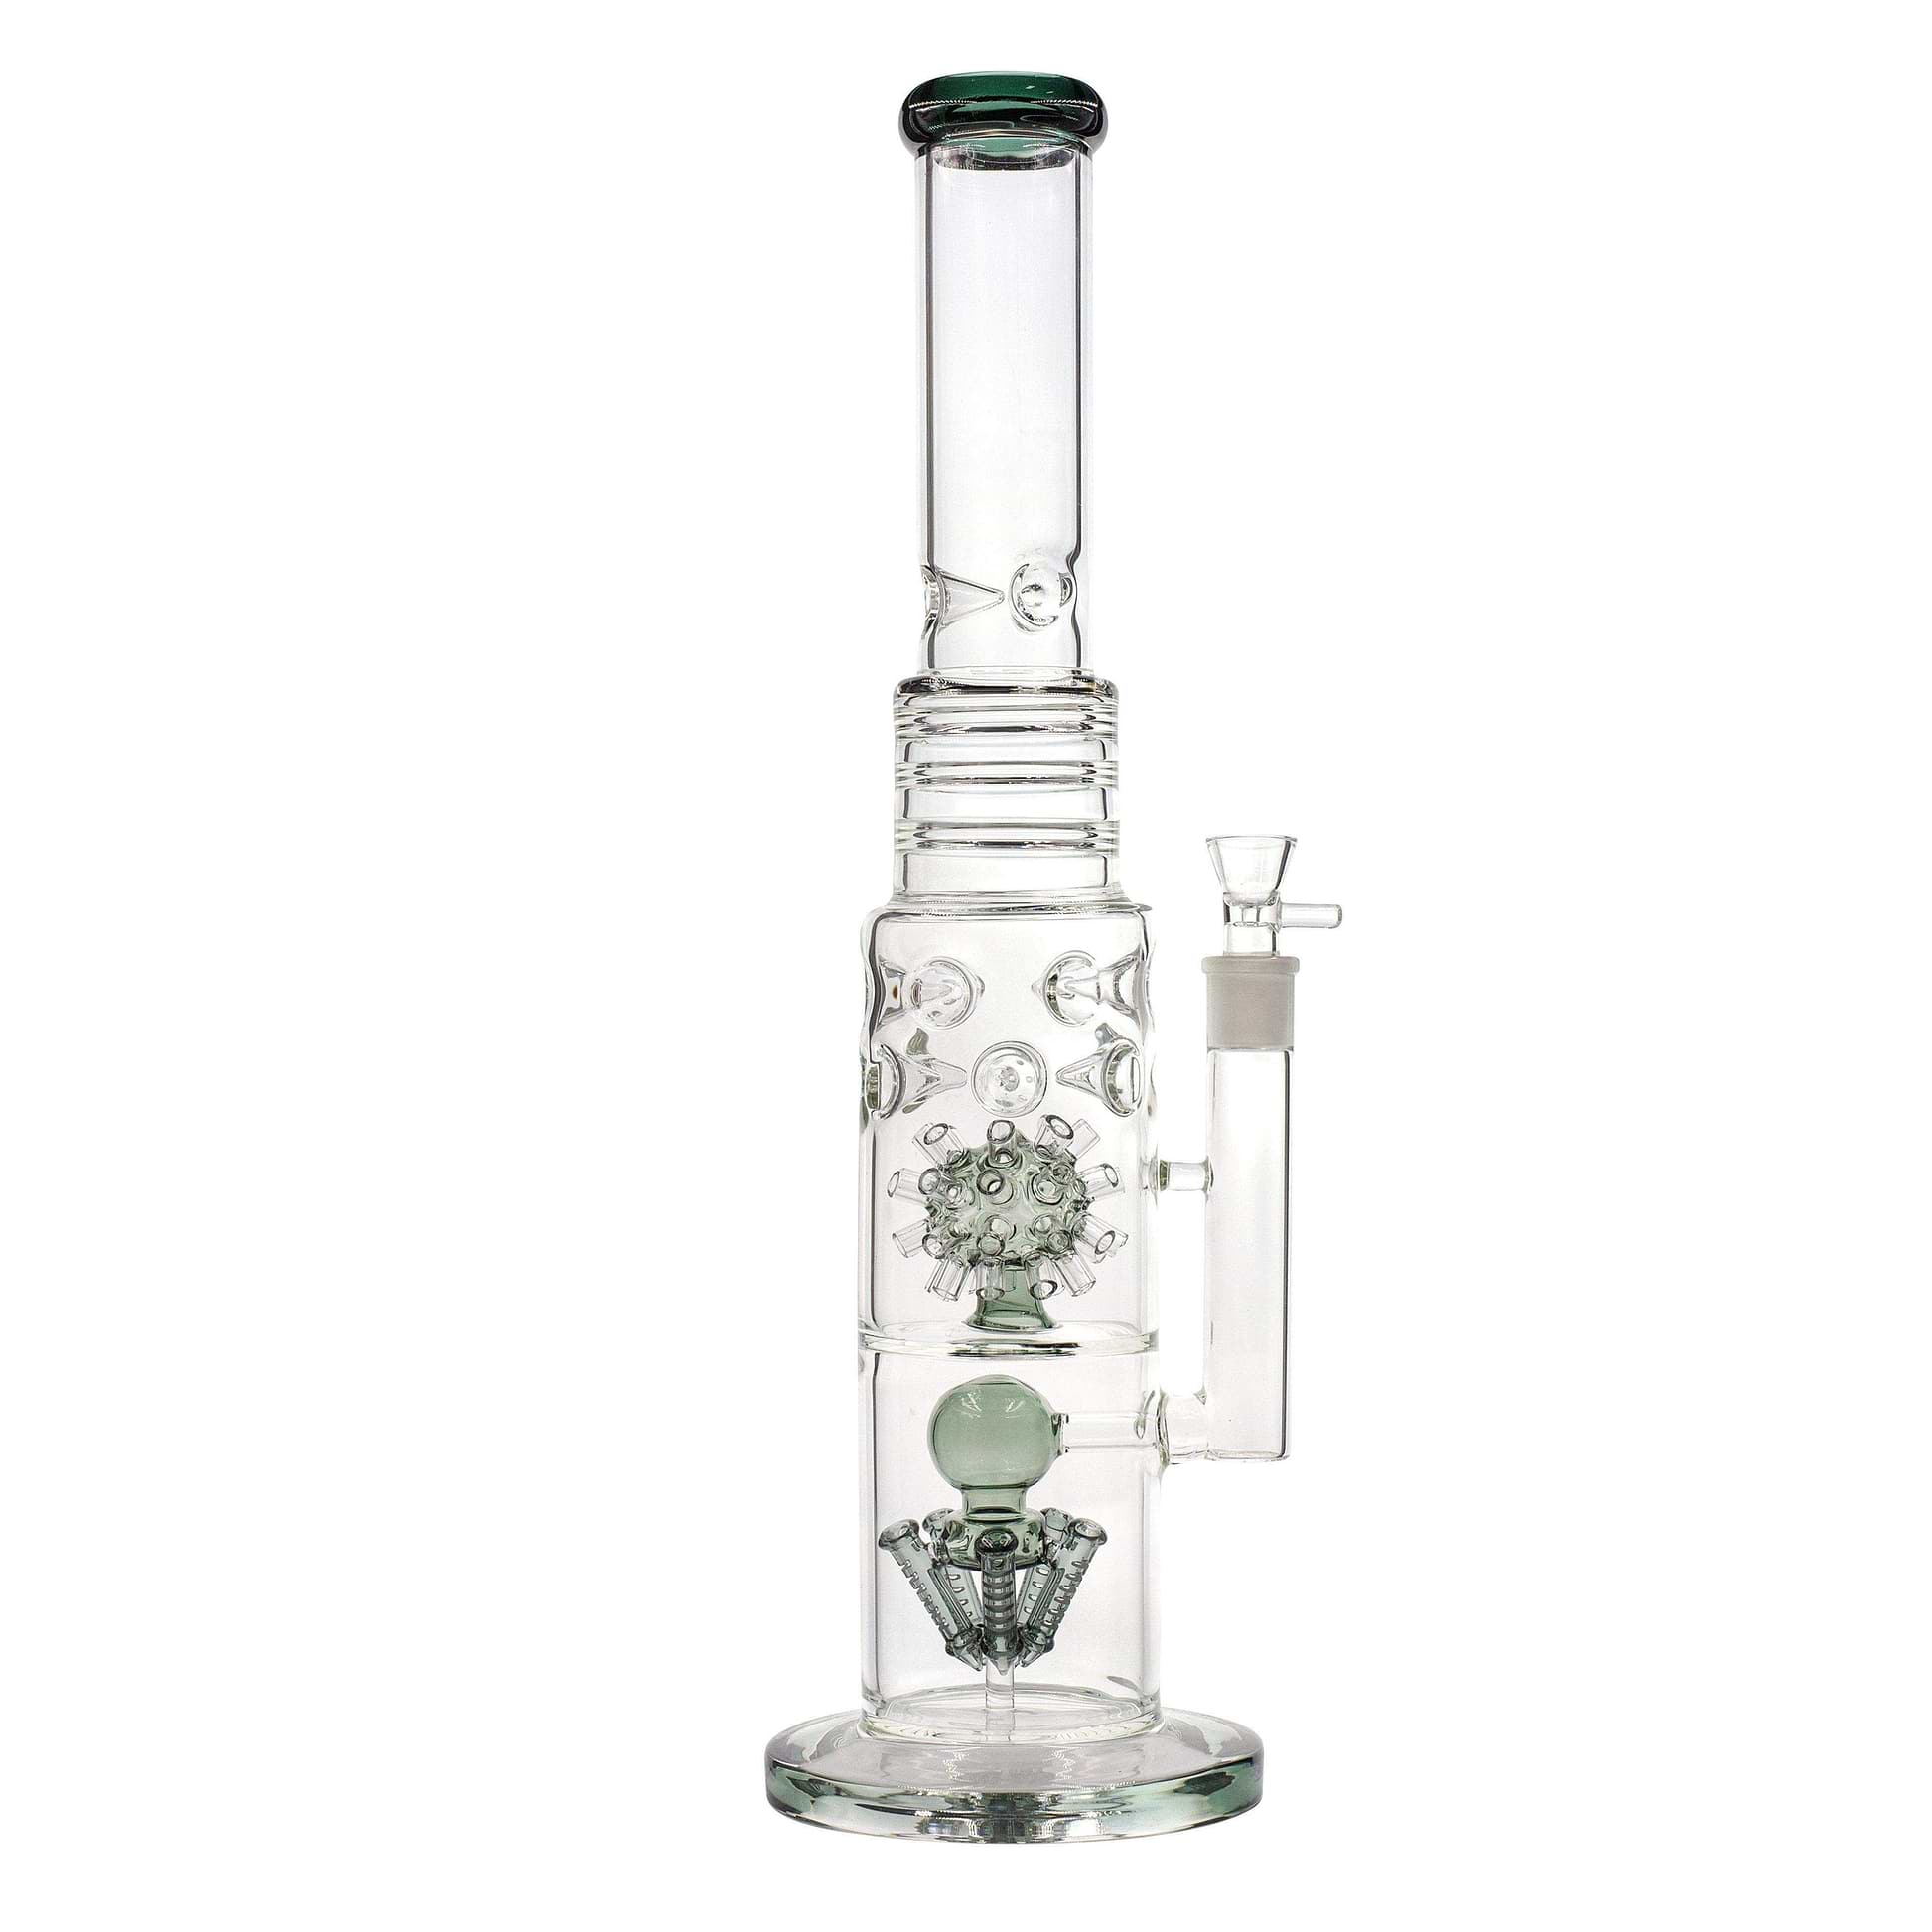 Grey Huge 19-inch glass bong smoking device with 2 percs unique diffision morning star perc unique design sturdy base